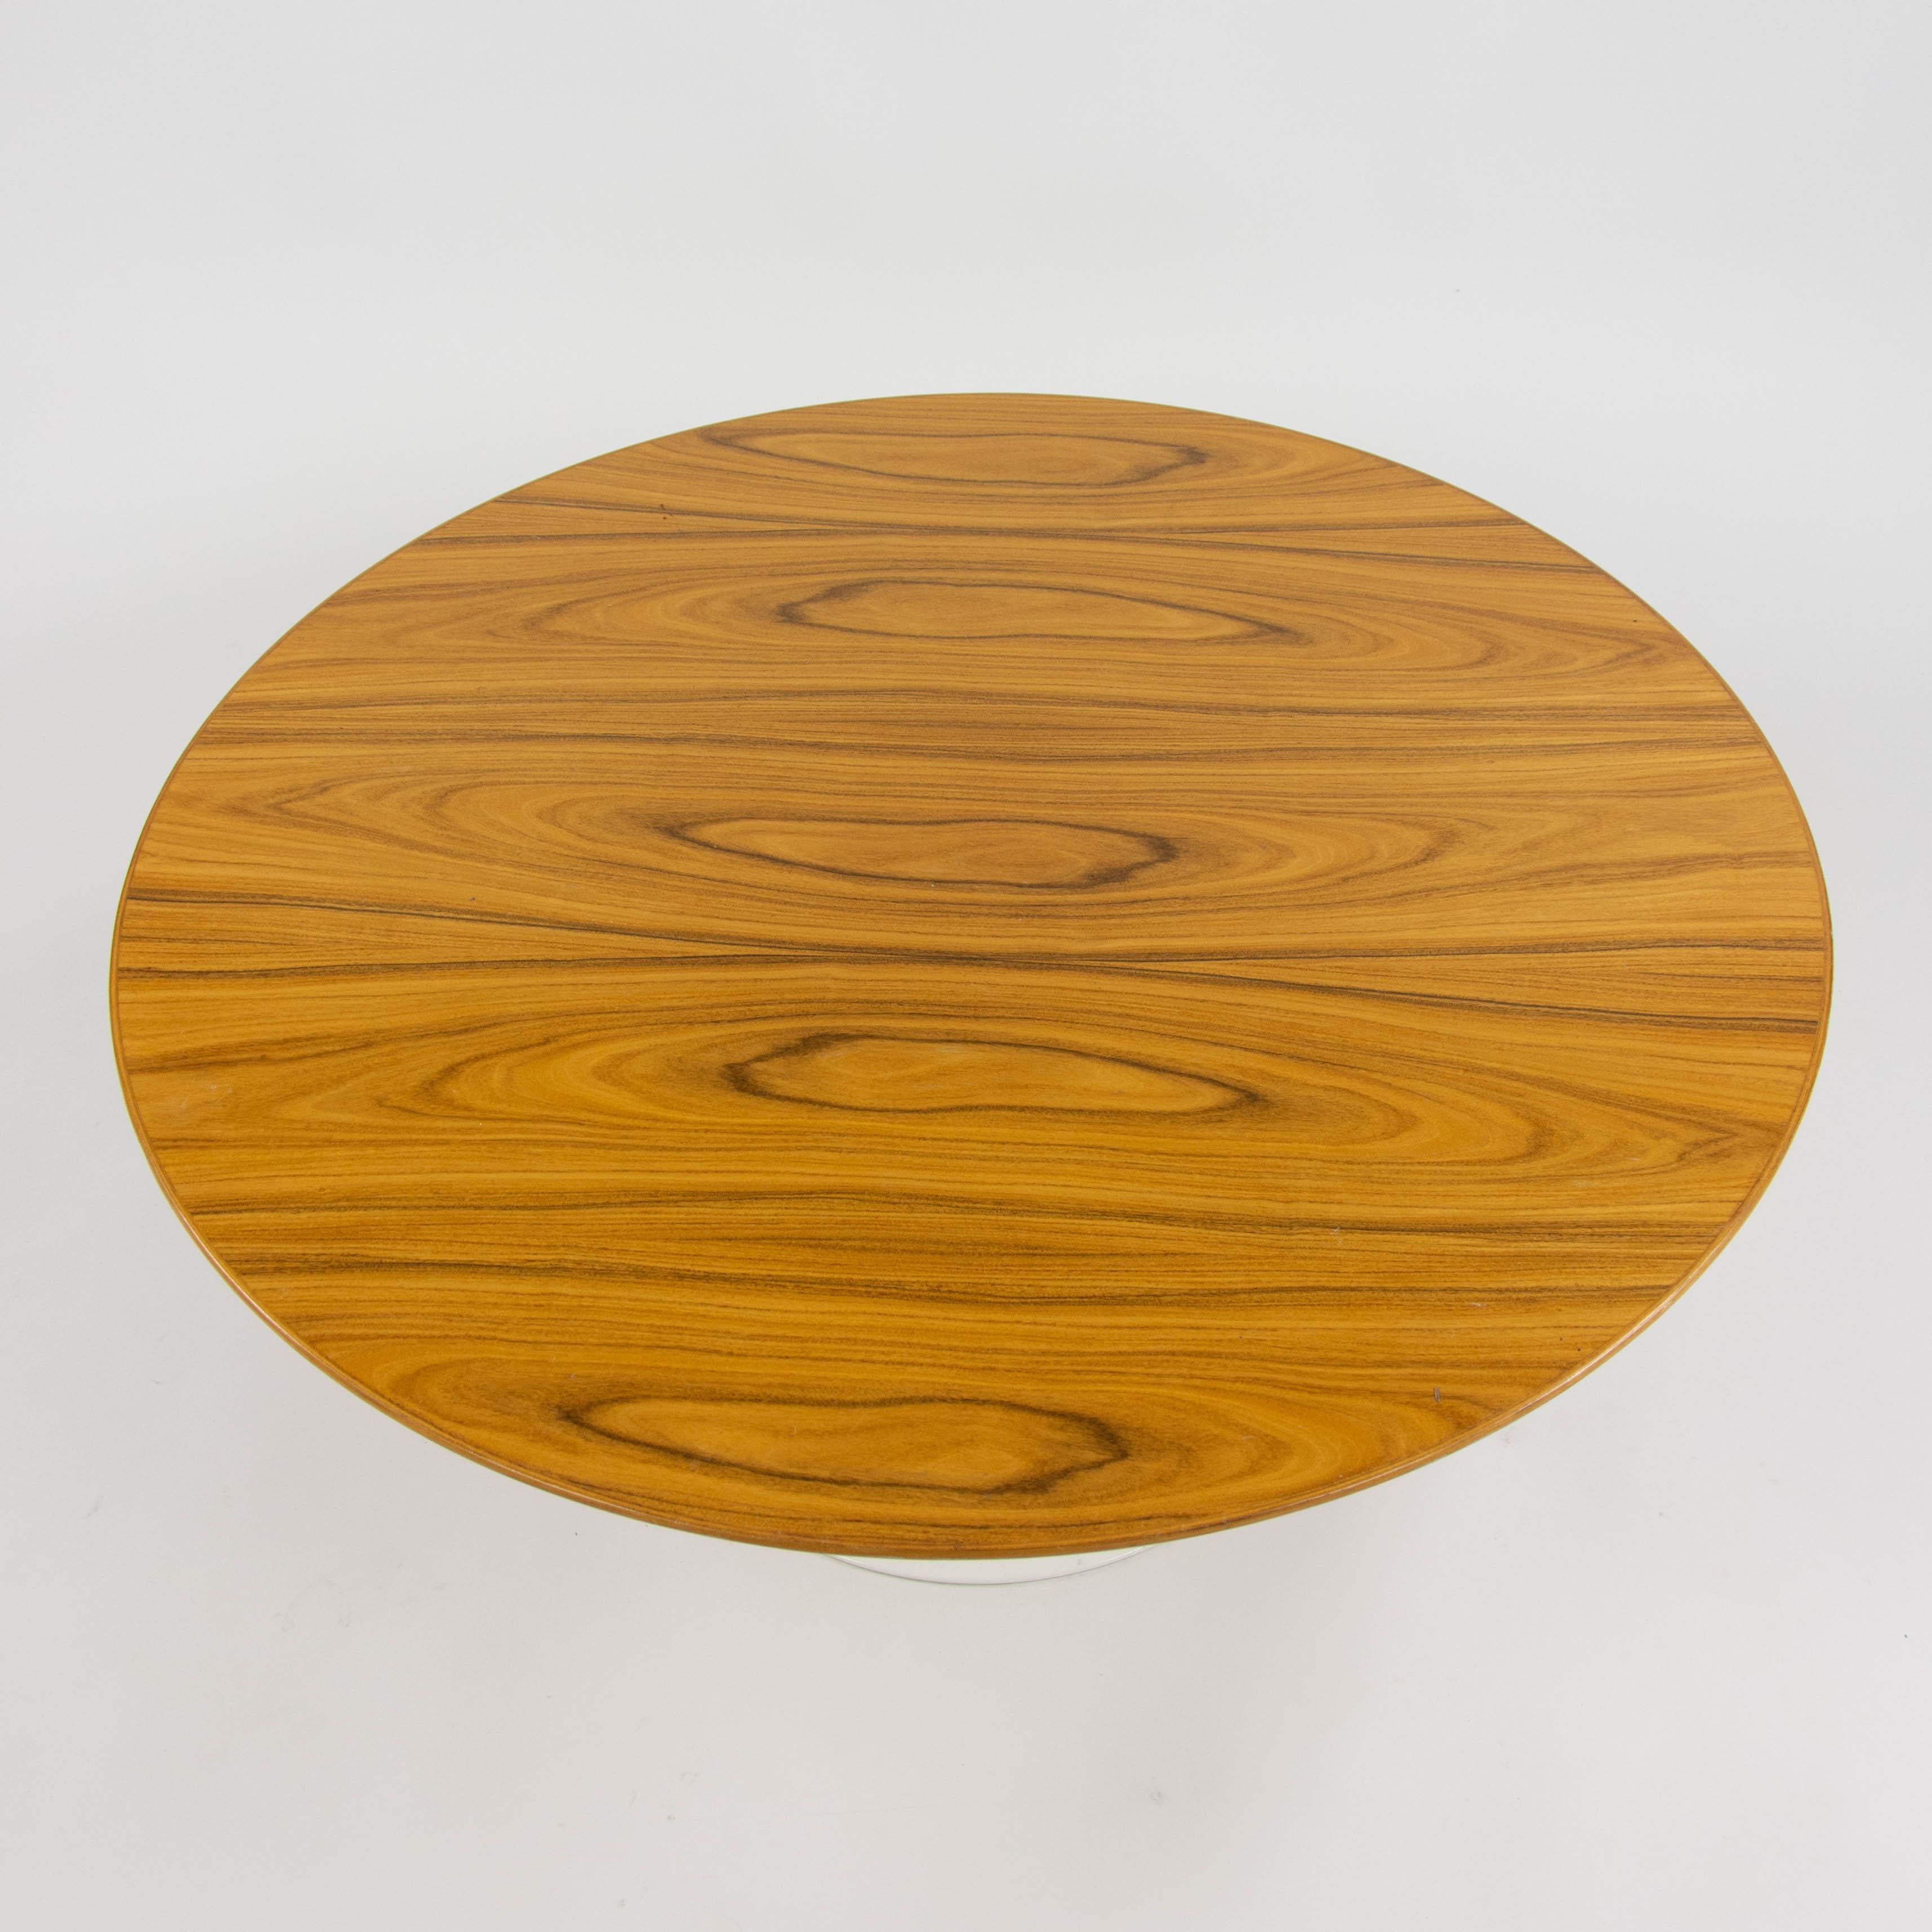 Contemporary Eero Saarinen For Knoll International 35 Inch Tulip Coffee Table Rosewood 2009 For Sale